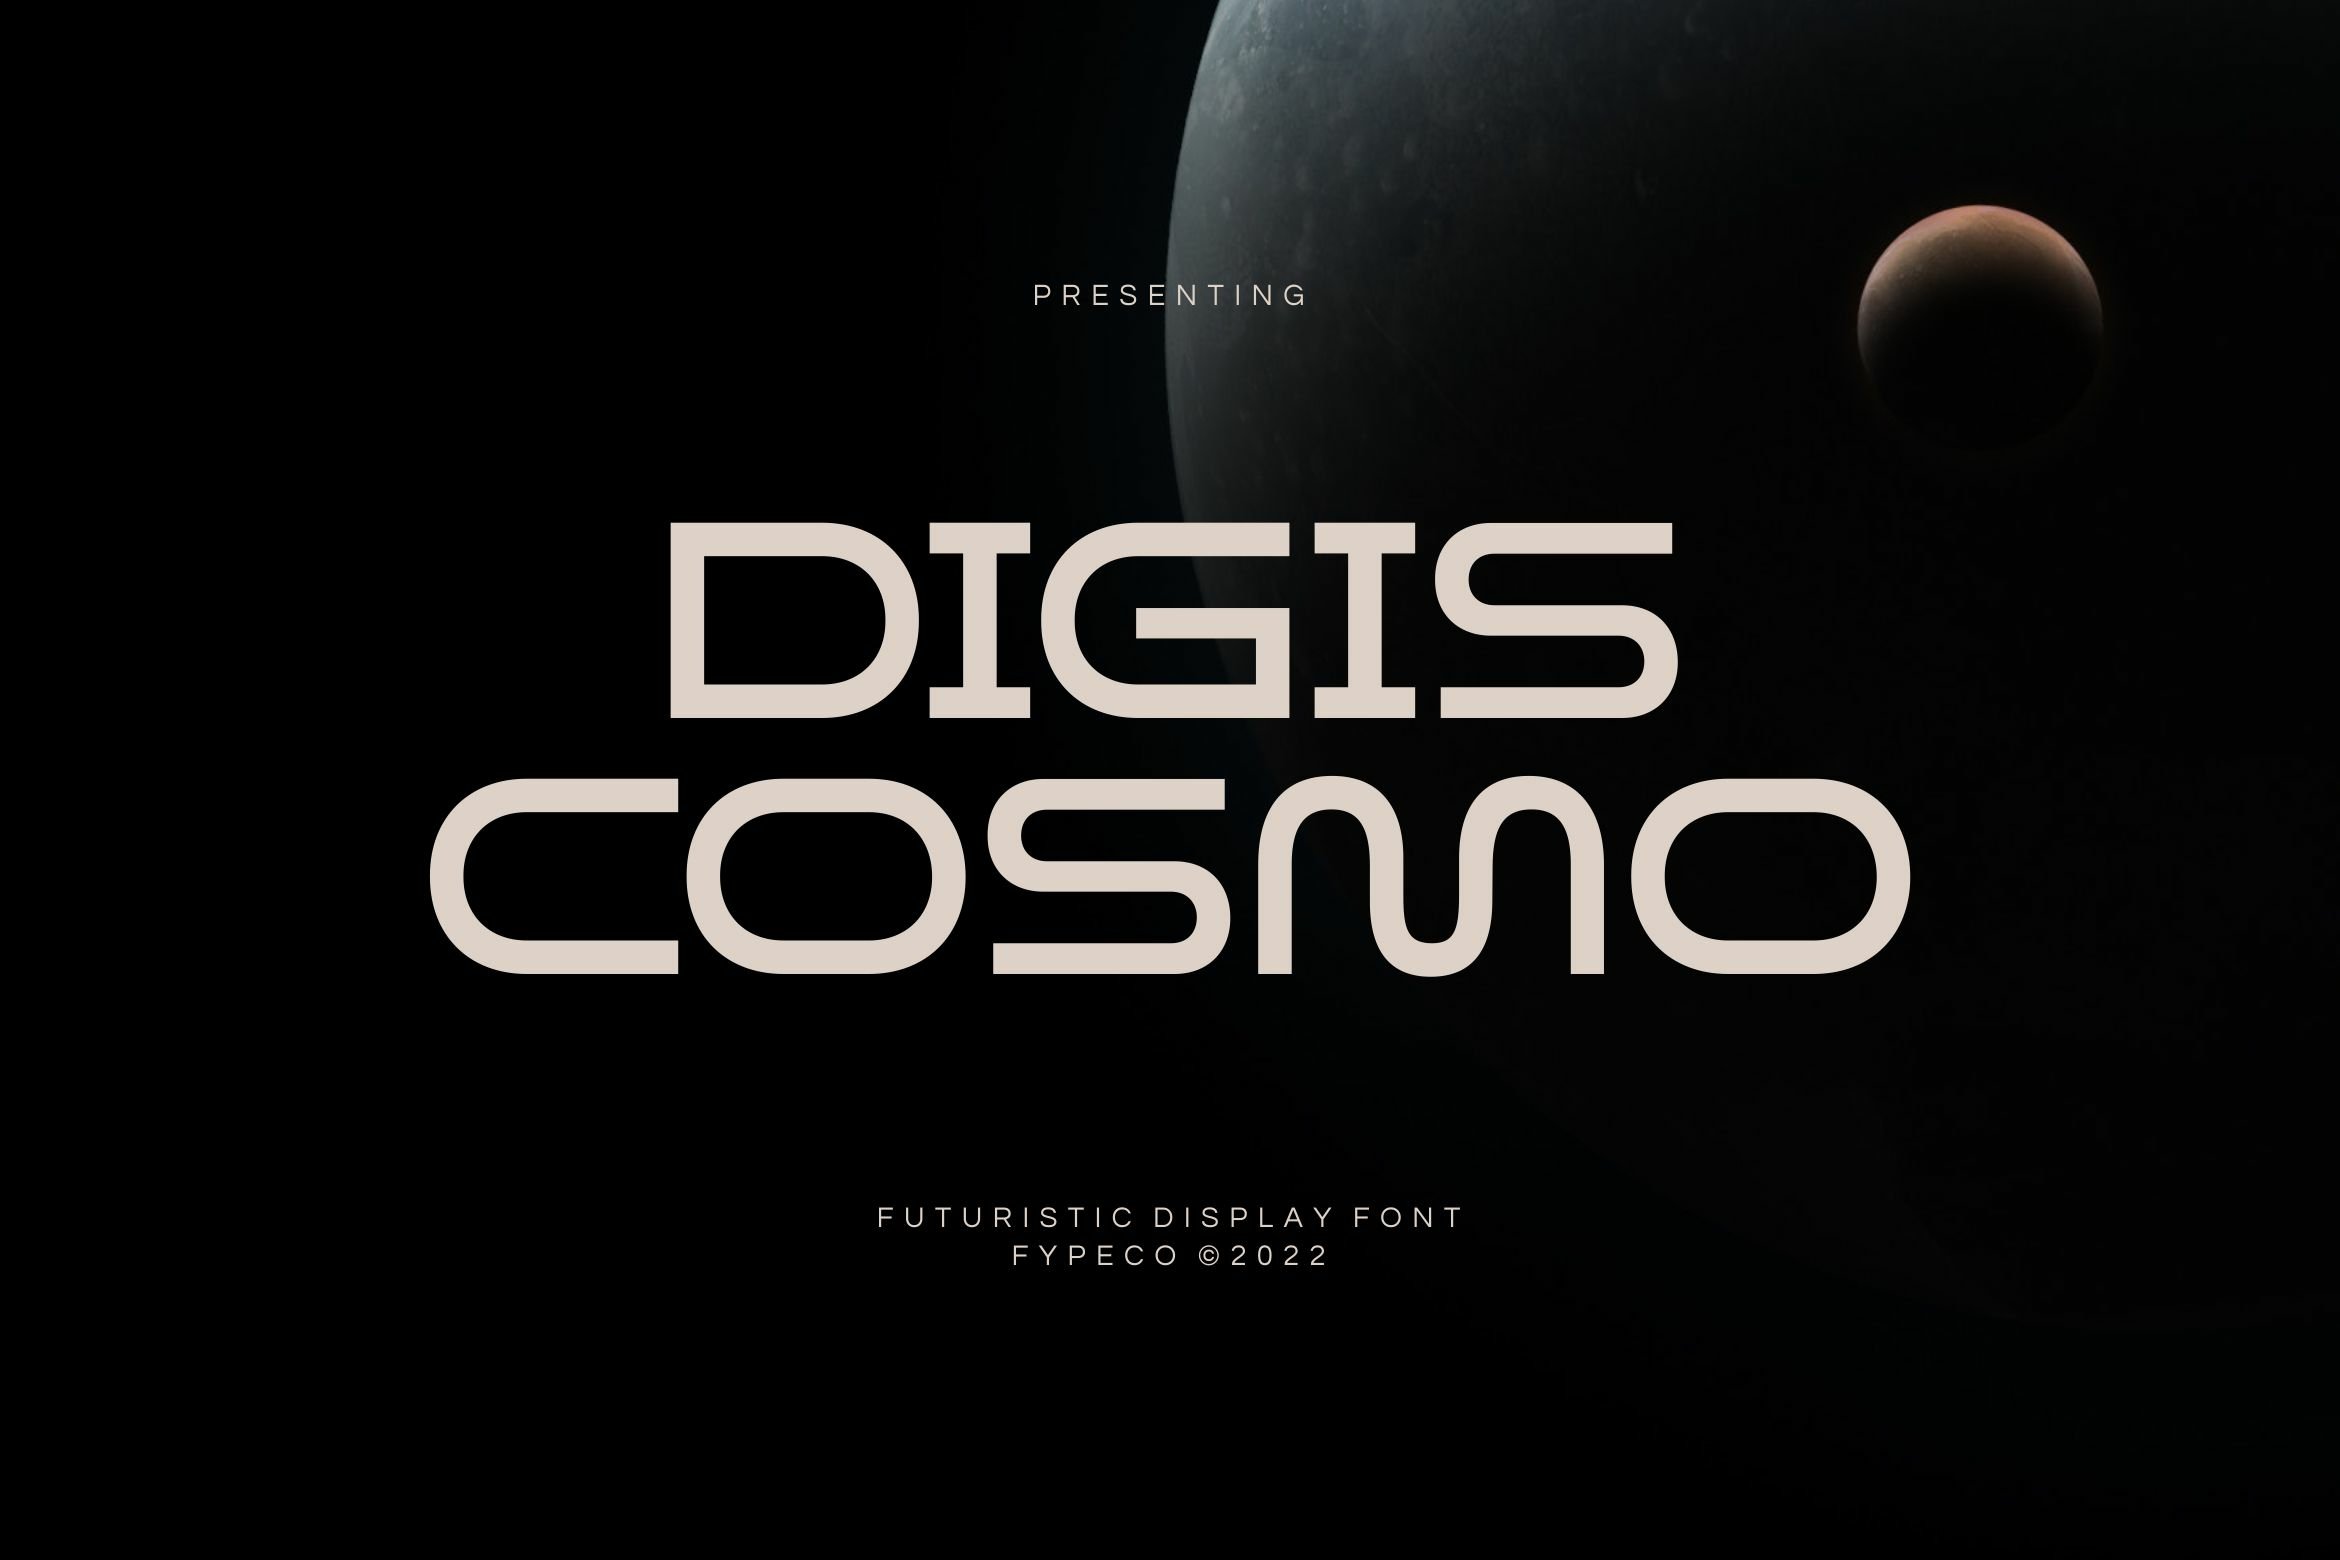 Font Digis Cosmo